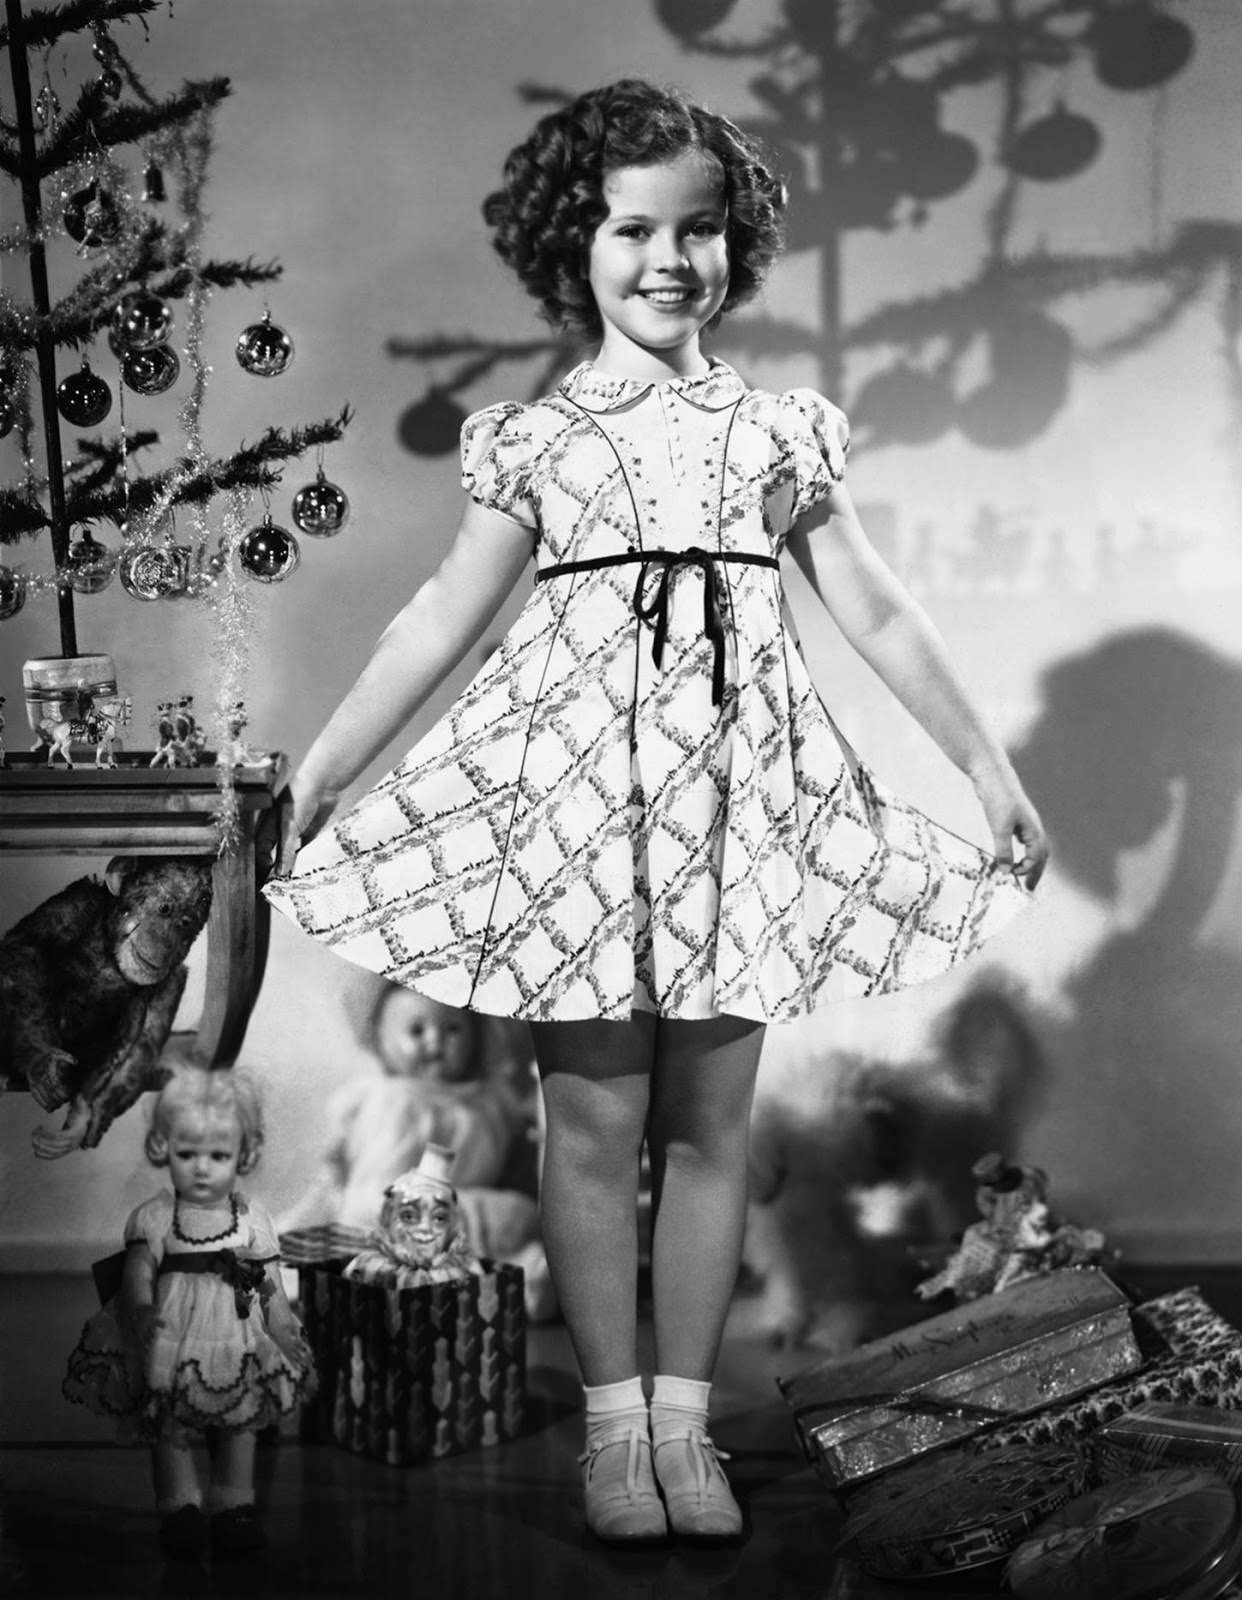 Shirley Temple modeled a new Christmas dress in 1935.